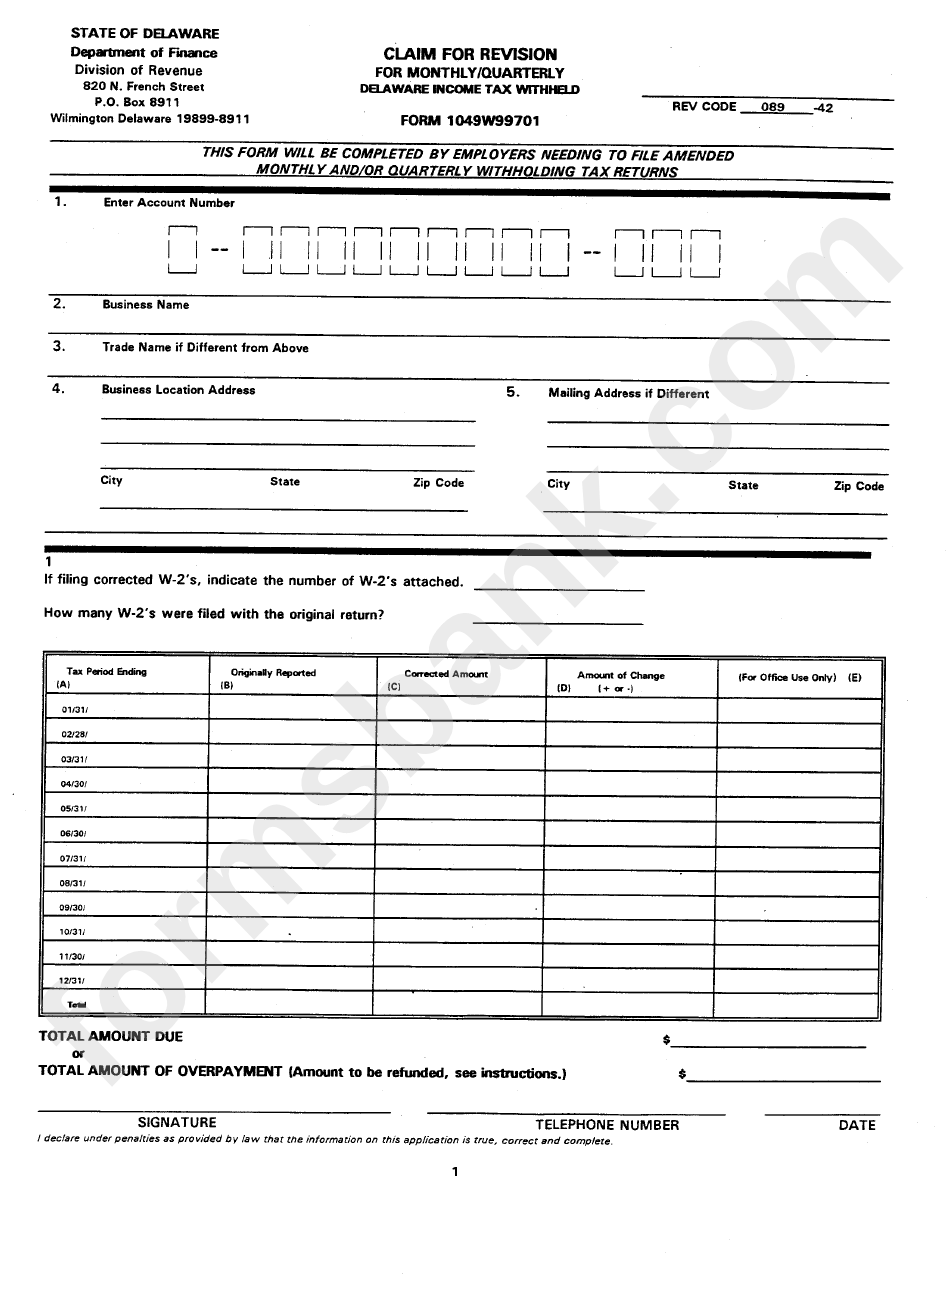 Form 1049w99701 - Claim For Revision For Monthly/quarterly Delaware Income Tax Withheld